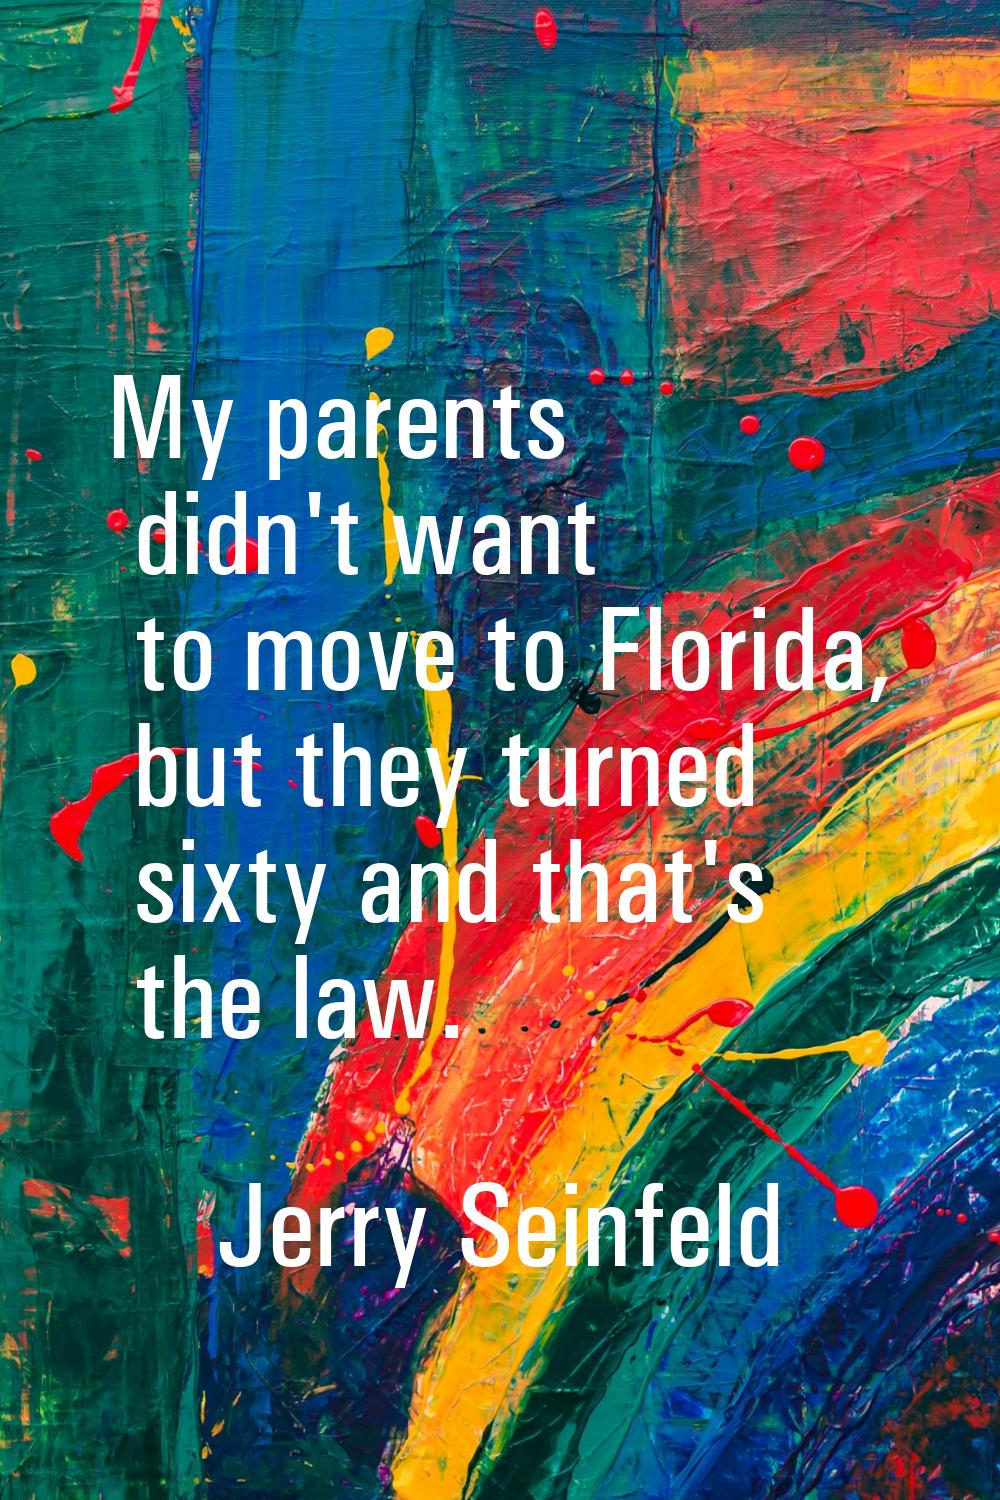 My parents didn't want to move to Florida, but they turned sixty and that's the law.